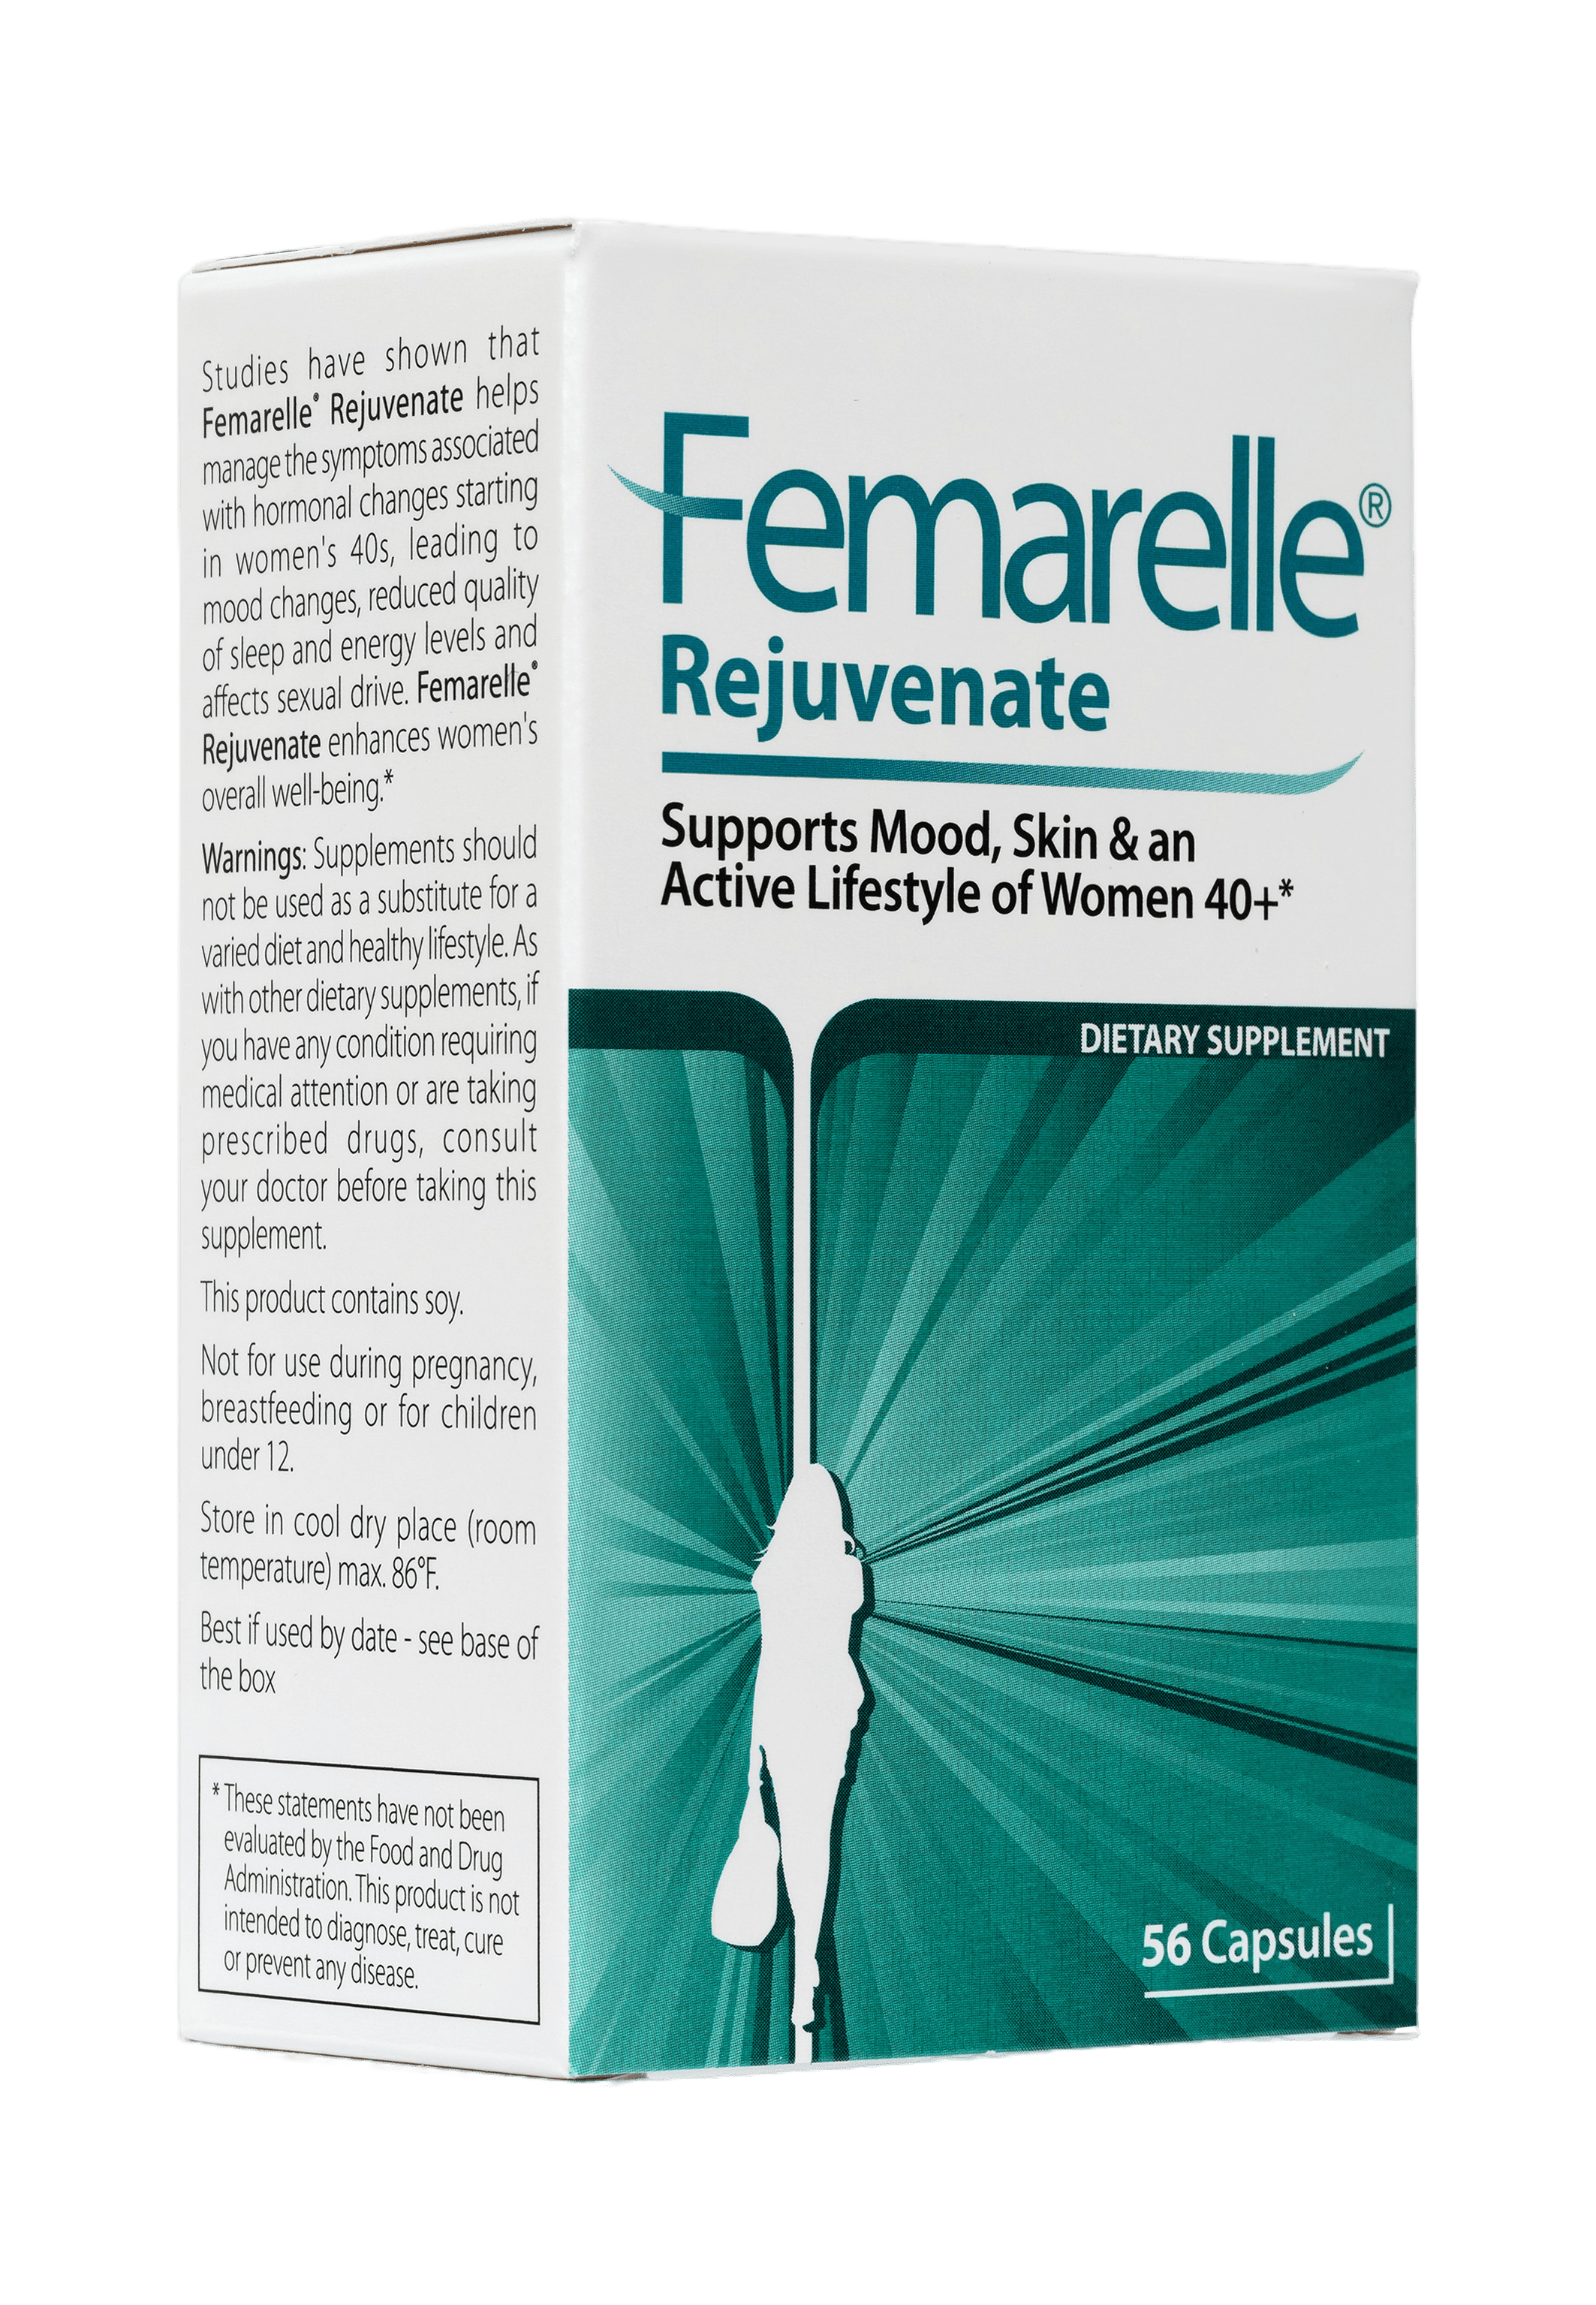 Femarelle Rejuvenate supports mood, skin and active lifestyle 